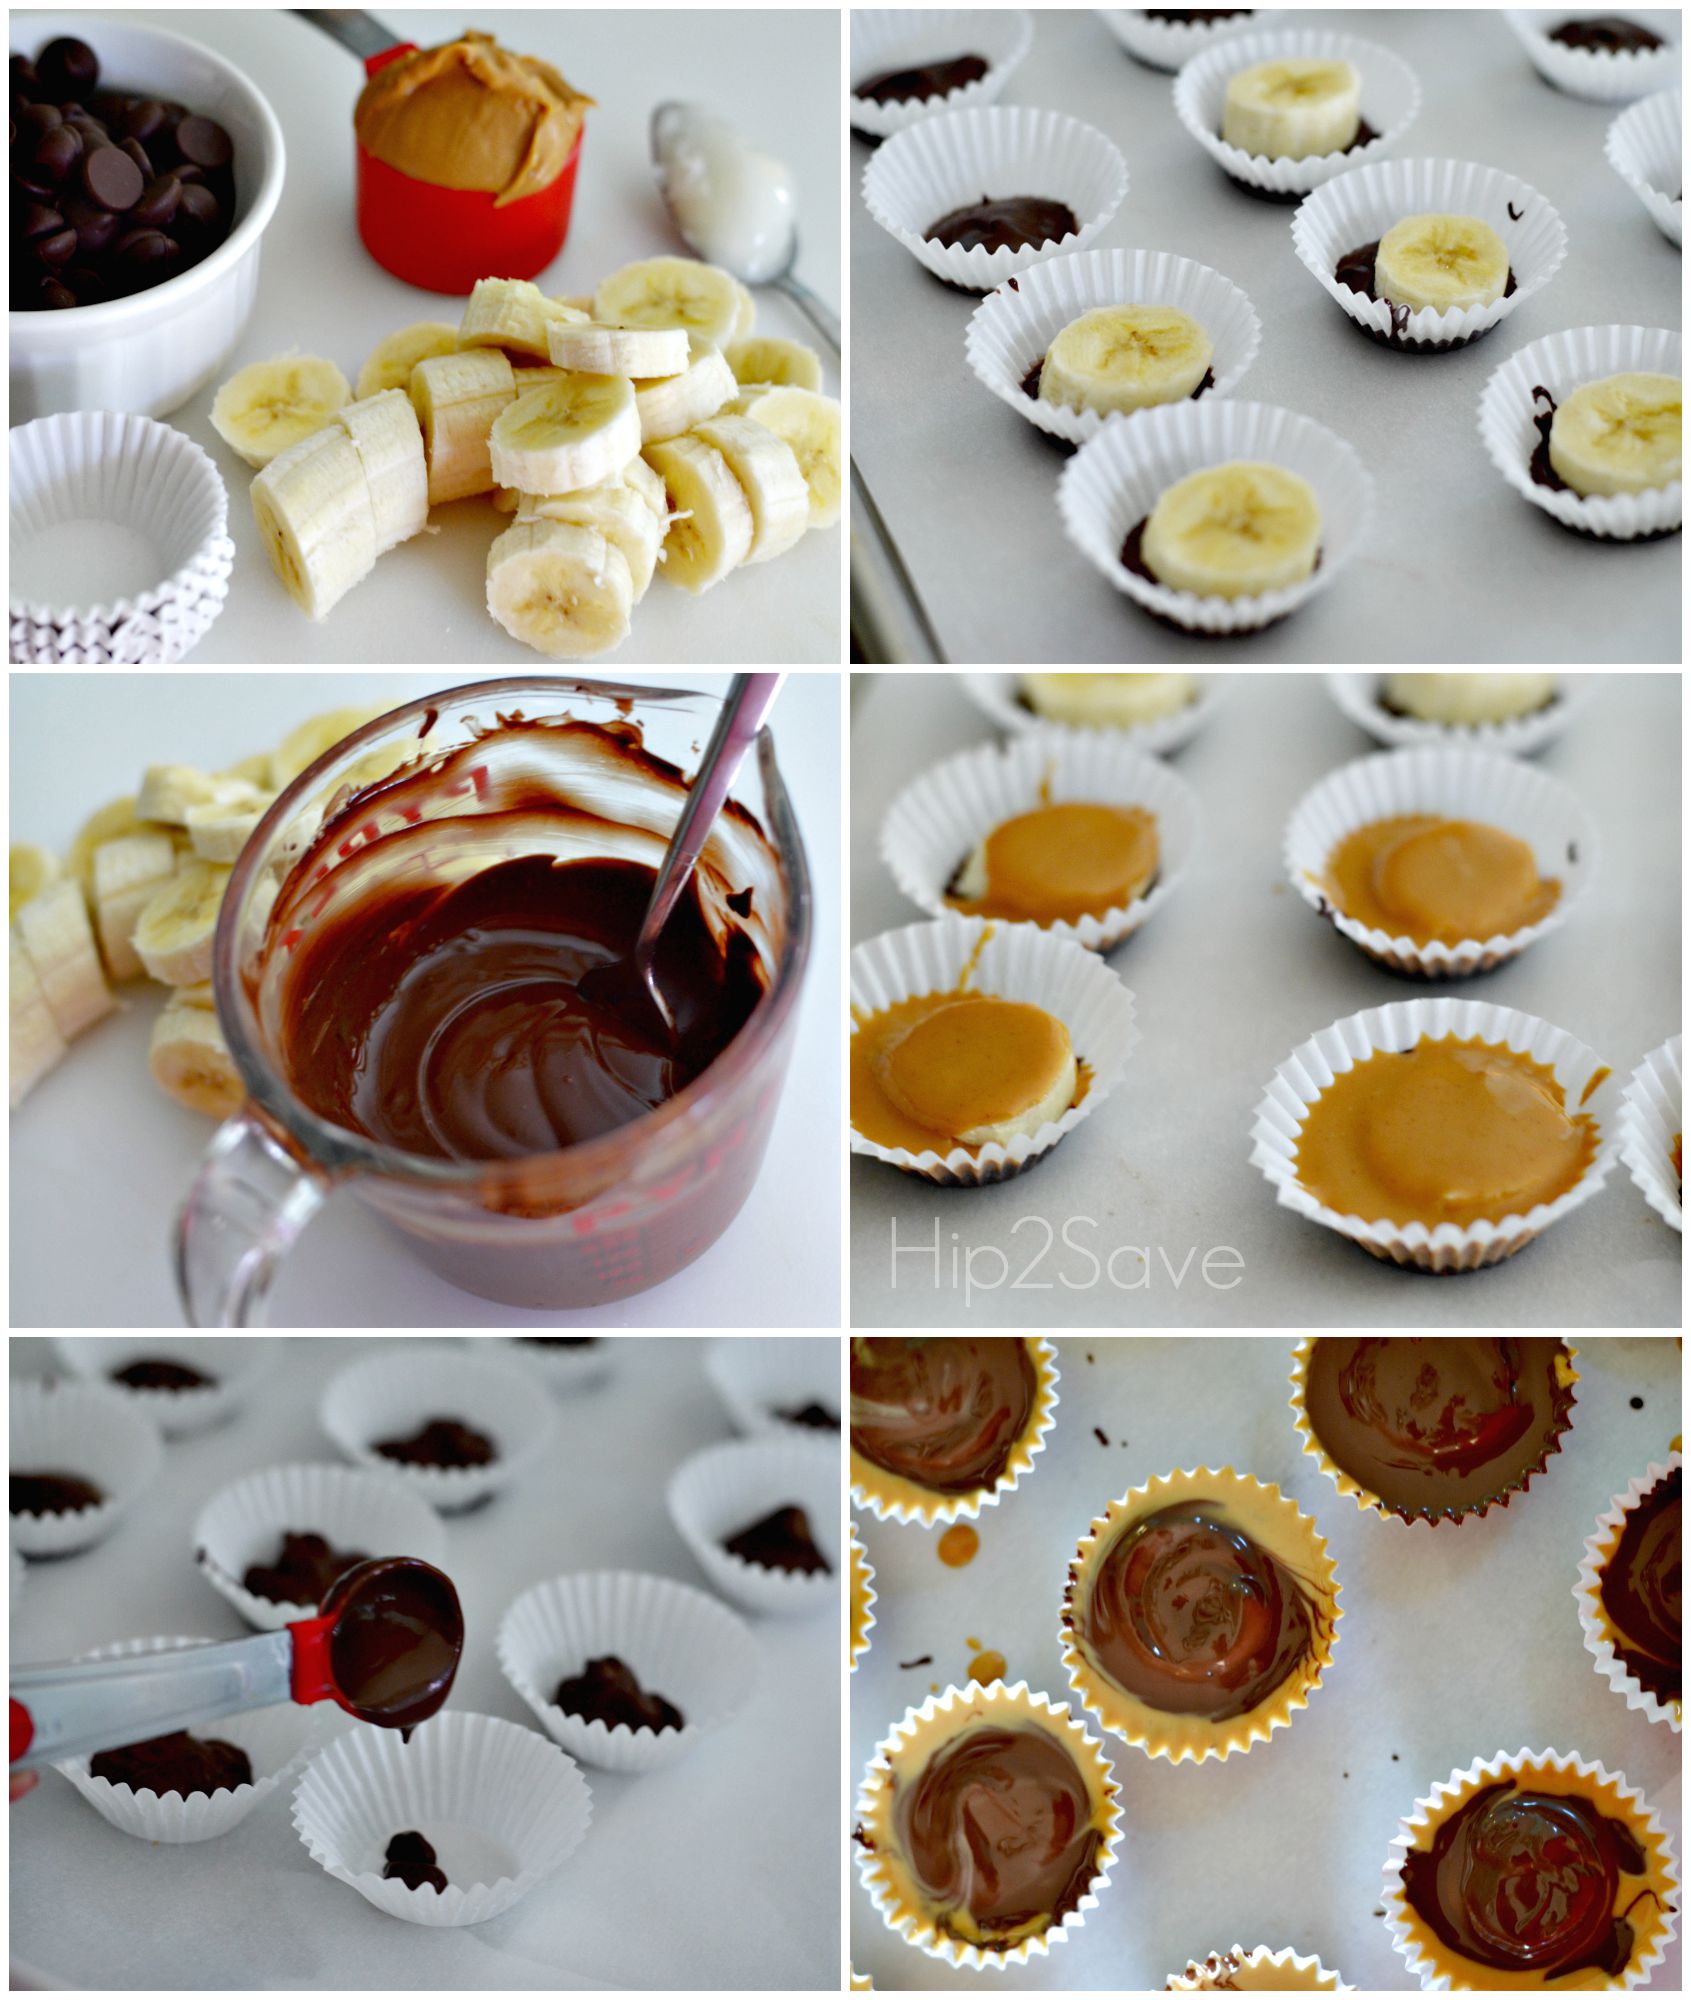 step by step process showig how to make peanut butter banana cups